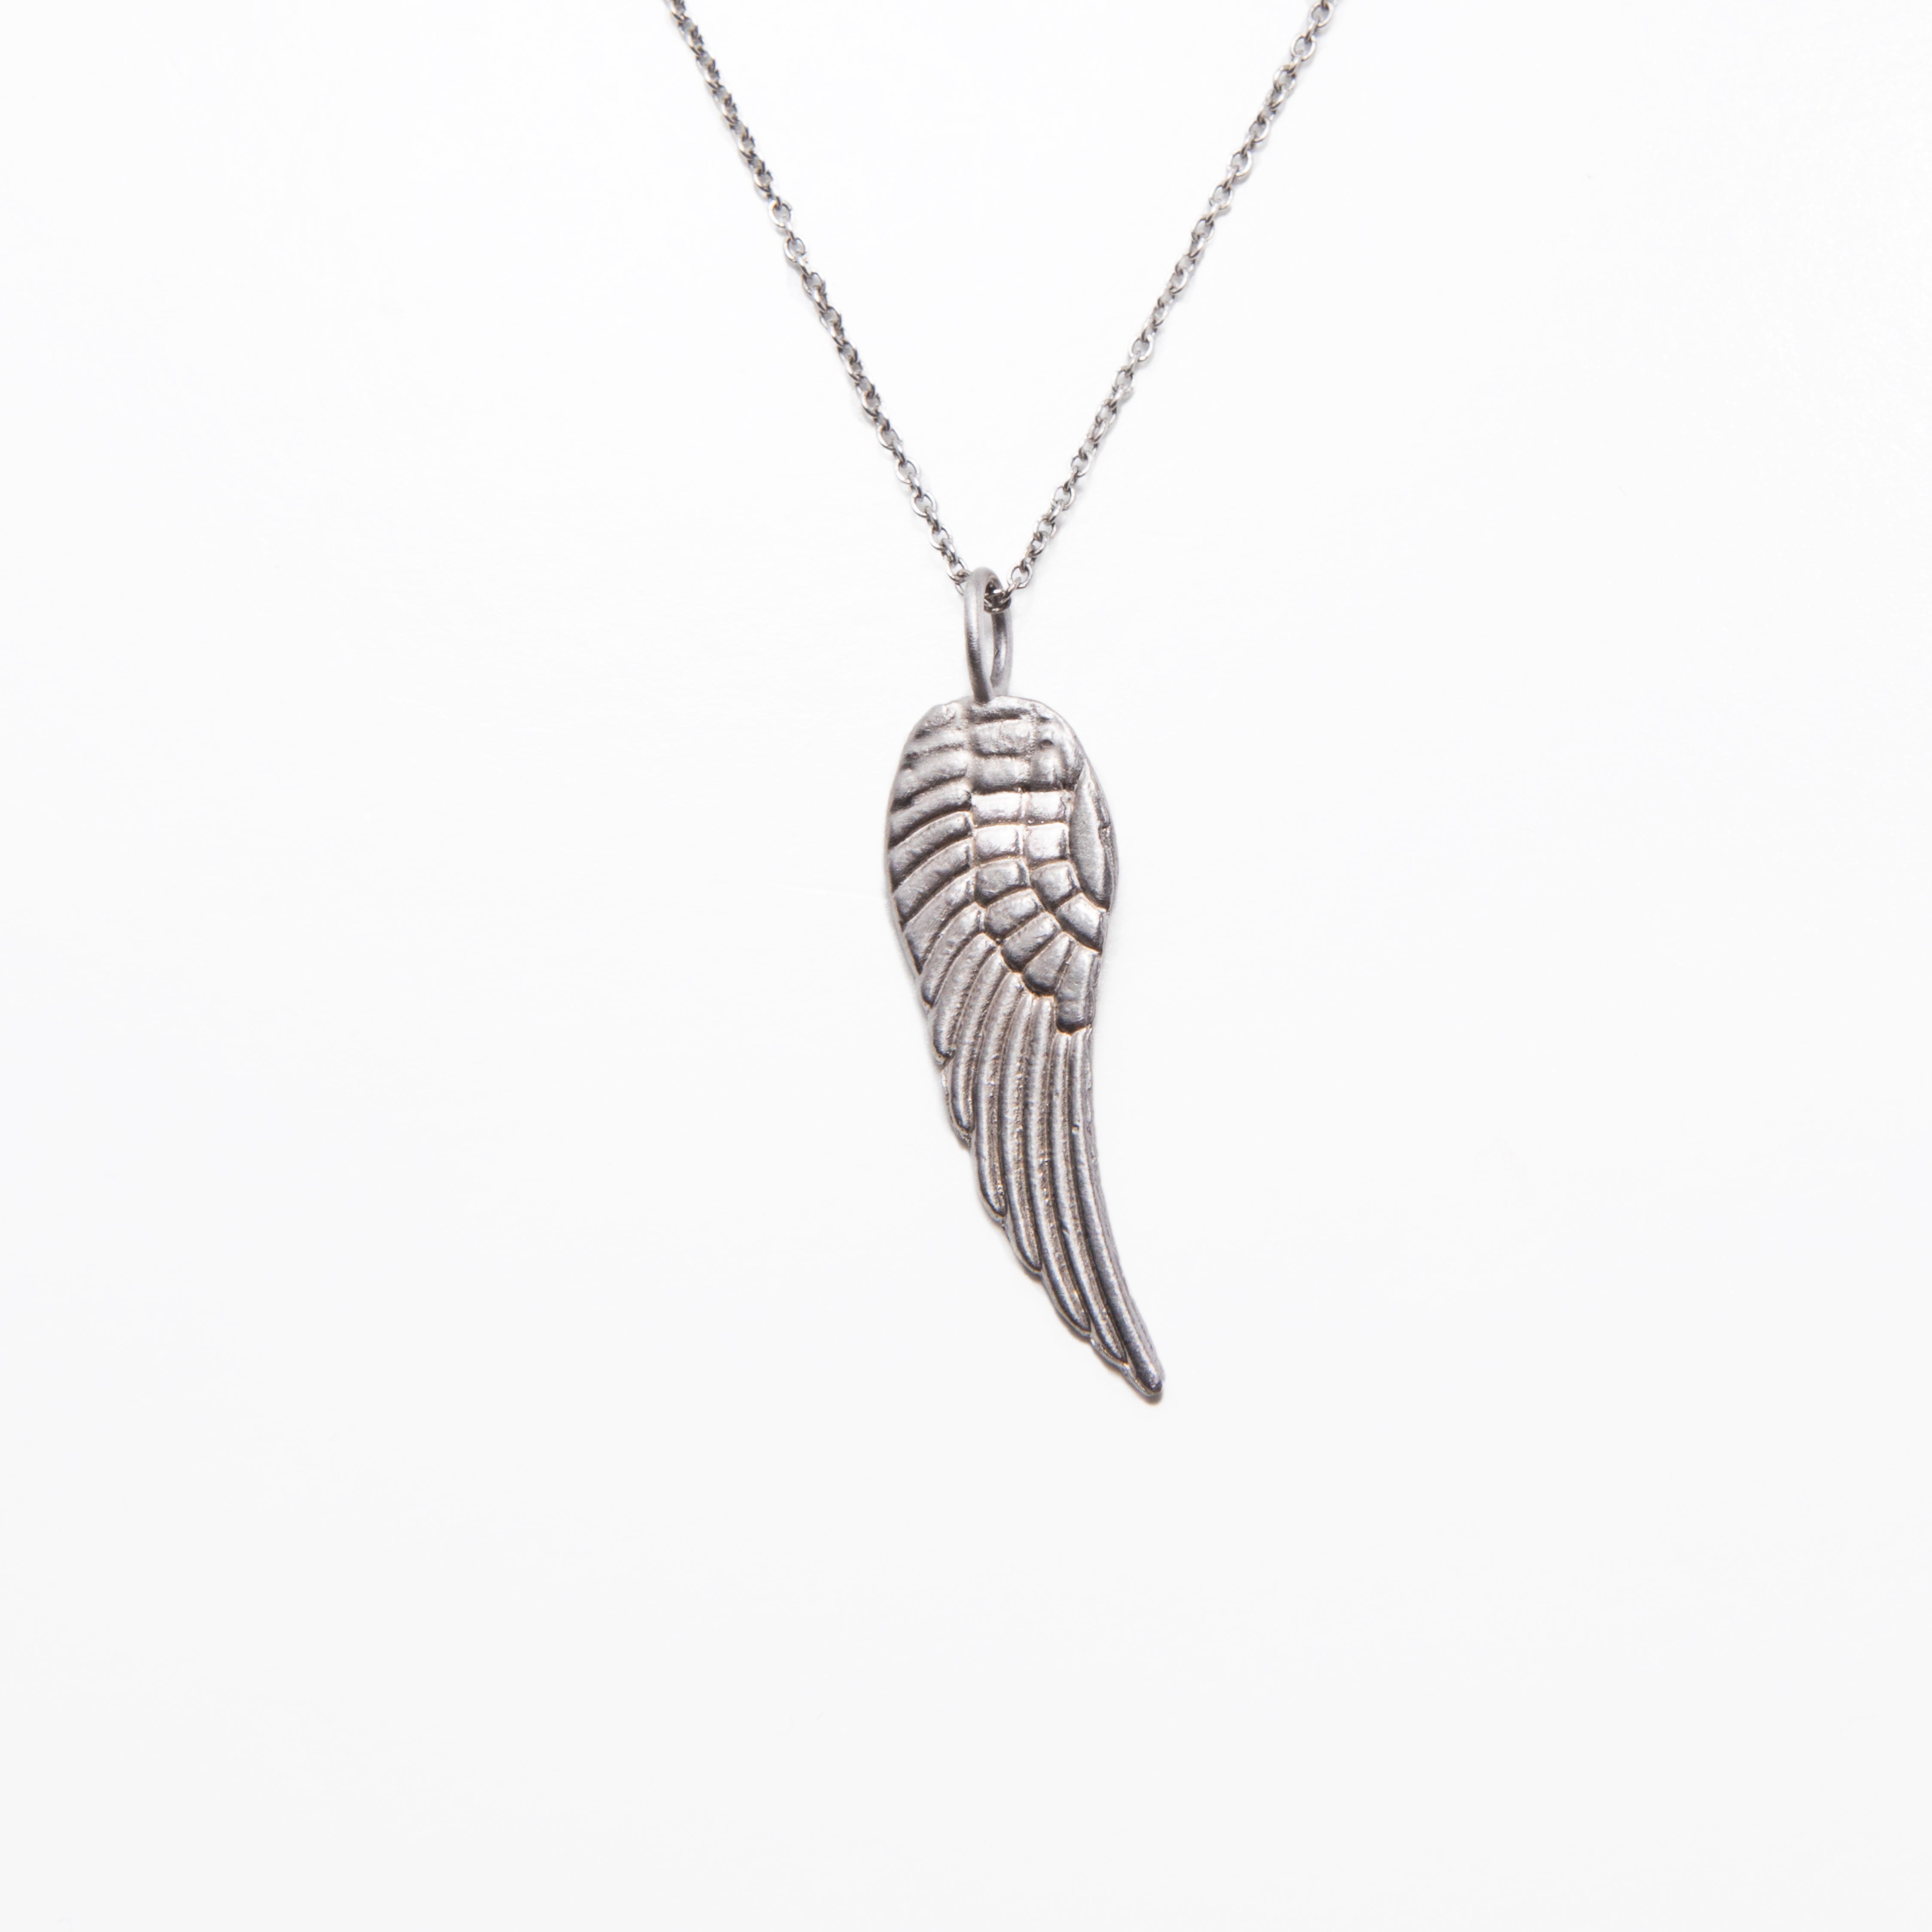 WD449, 14kt gold Large Angel Wing pendant. Chain sold separately.